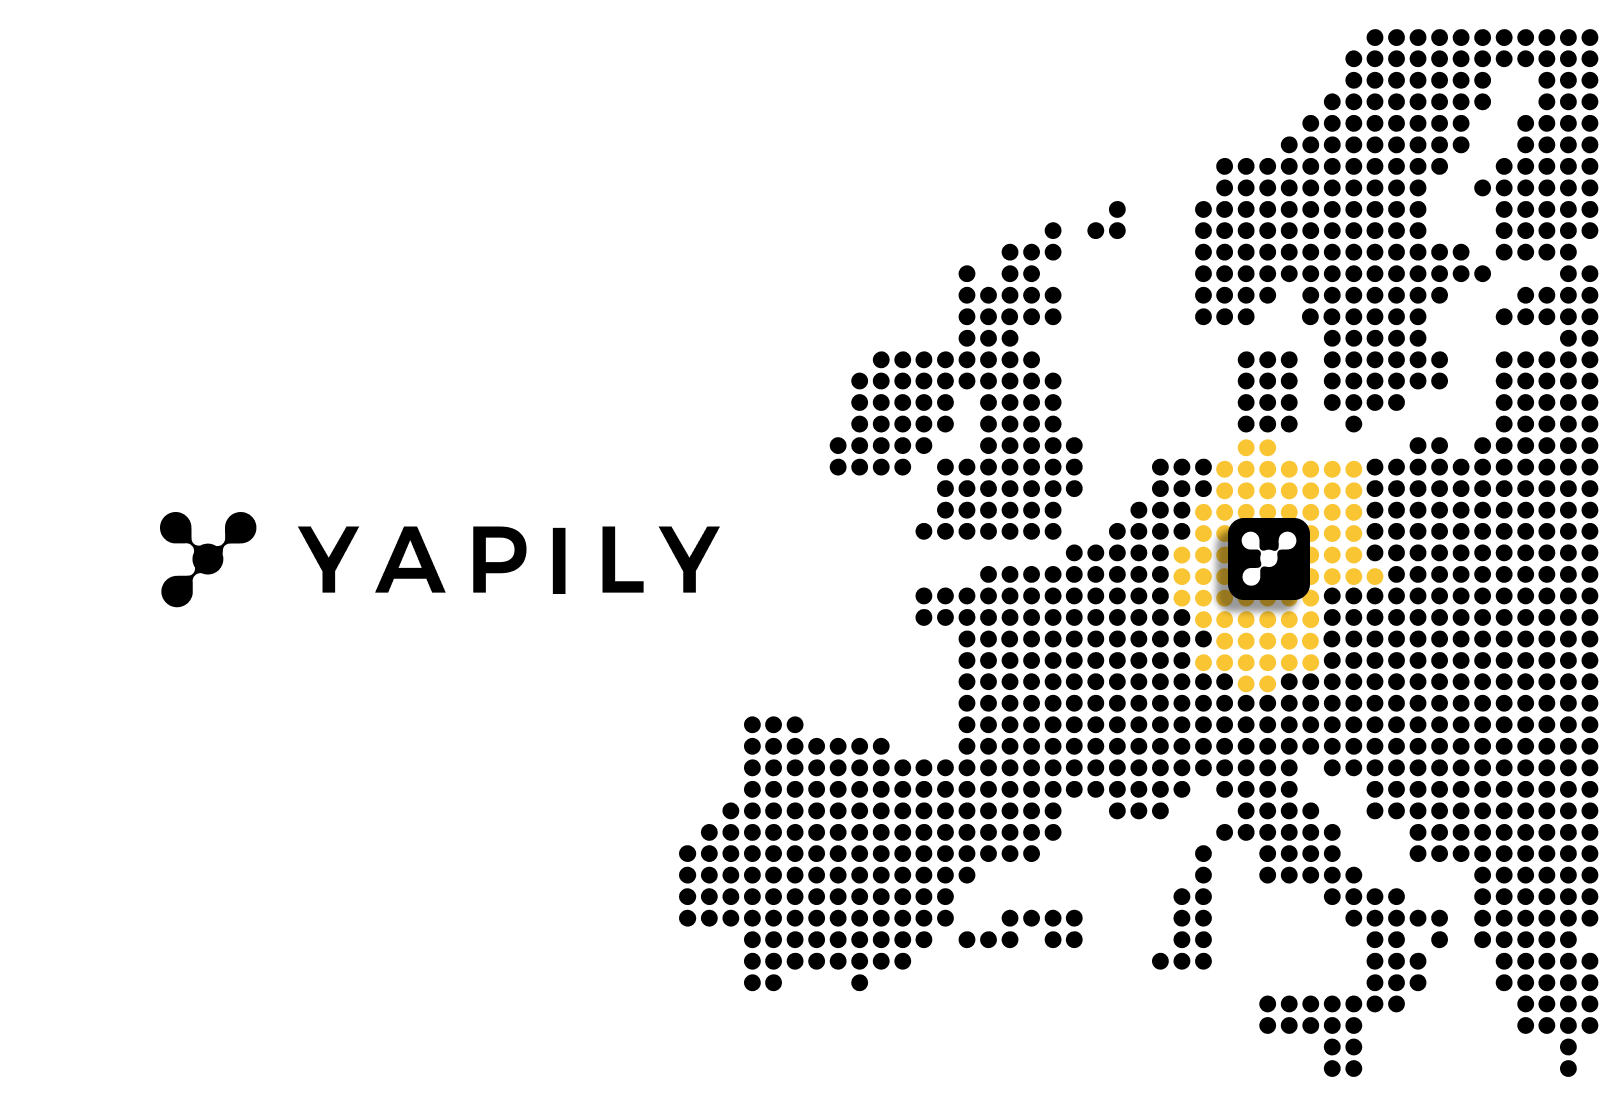 Yapily further expands its operations and launches in Germany. Lead by Chris Scheuermann, Yapily continues to consolidate its position as the backbone of Open Banking in Europe. 